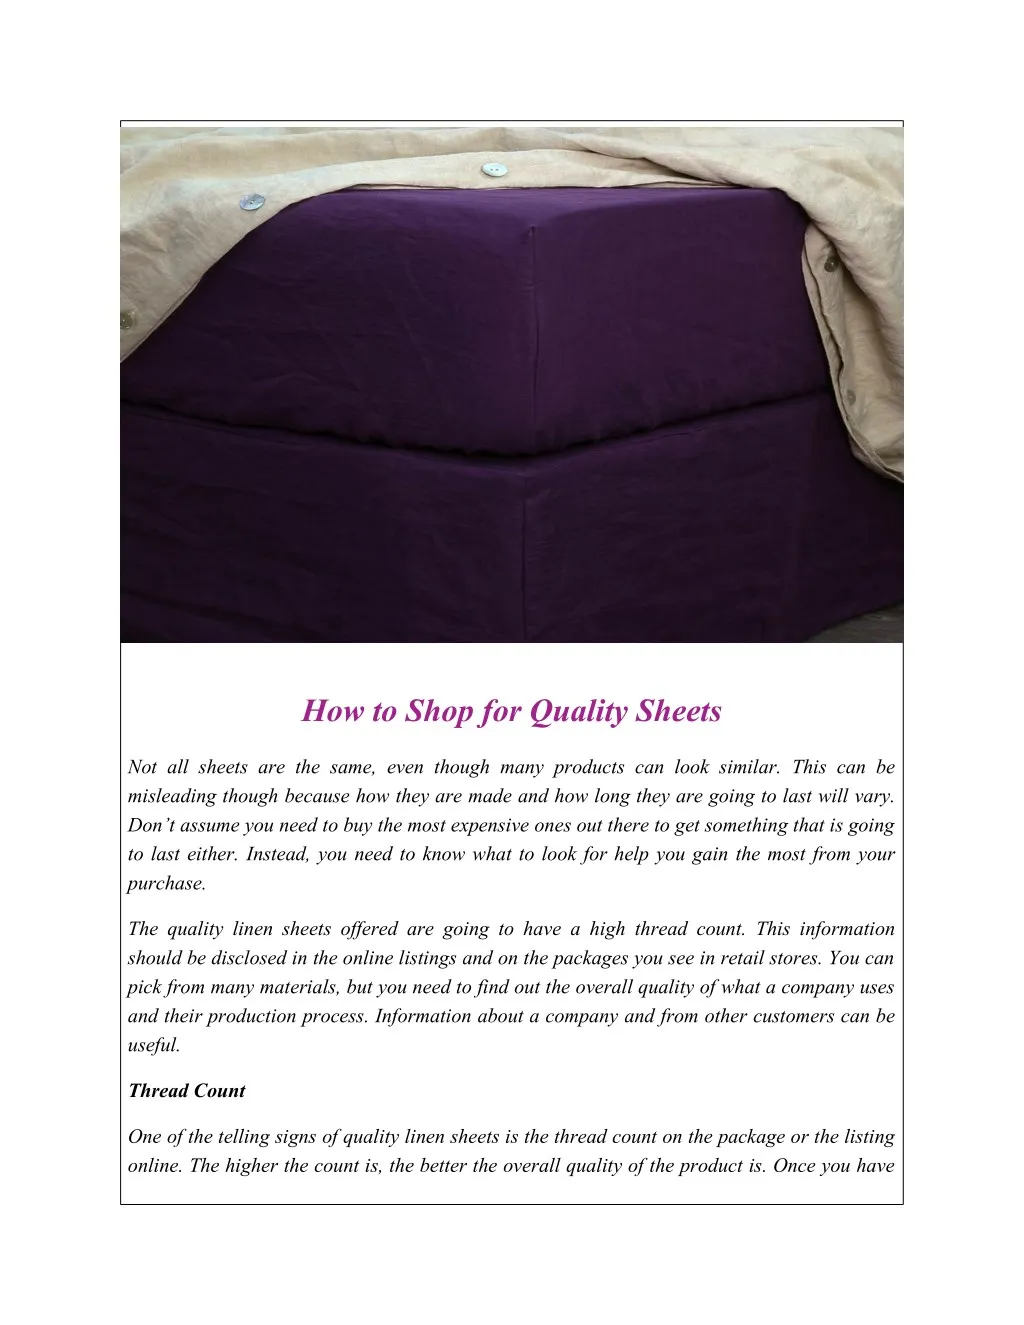 how to shop for quality sheets